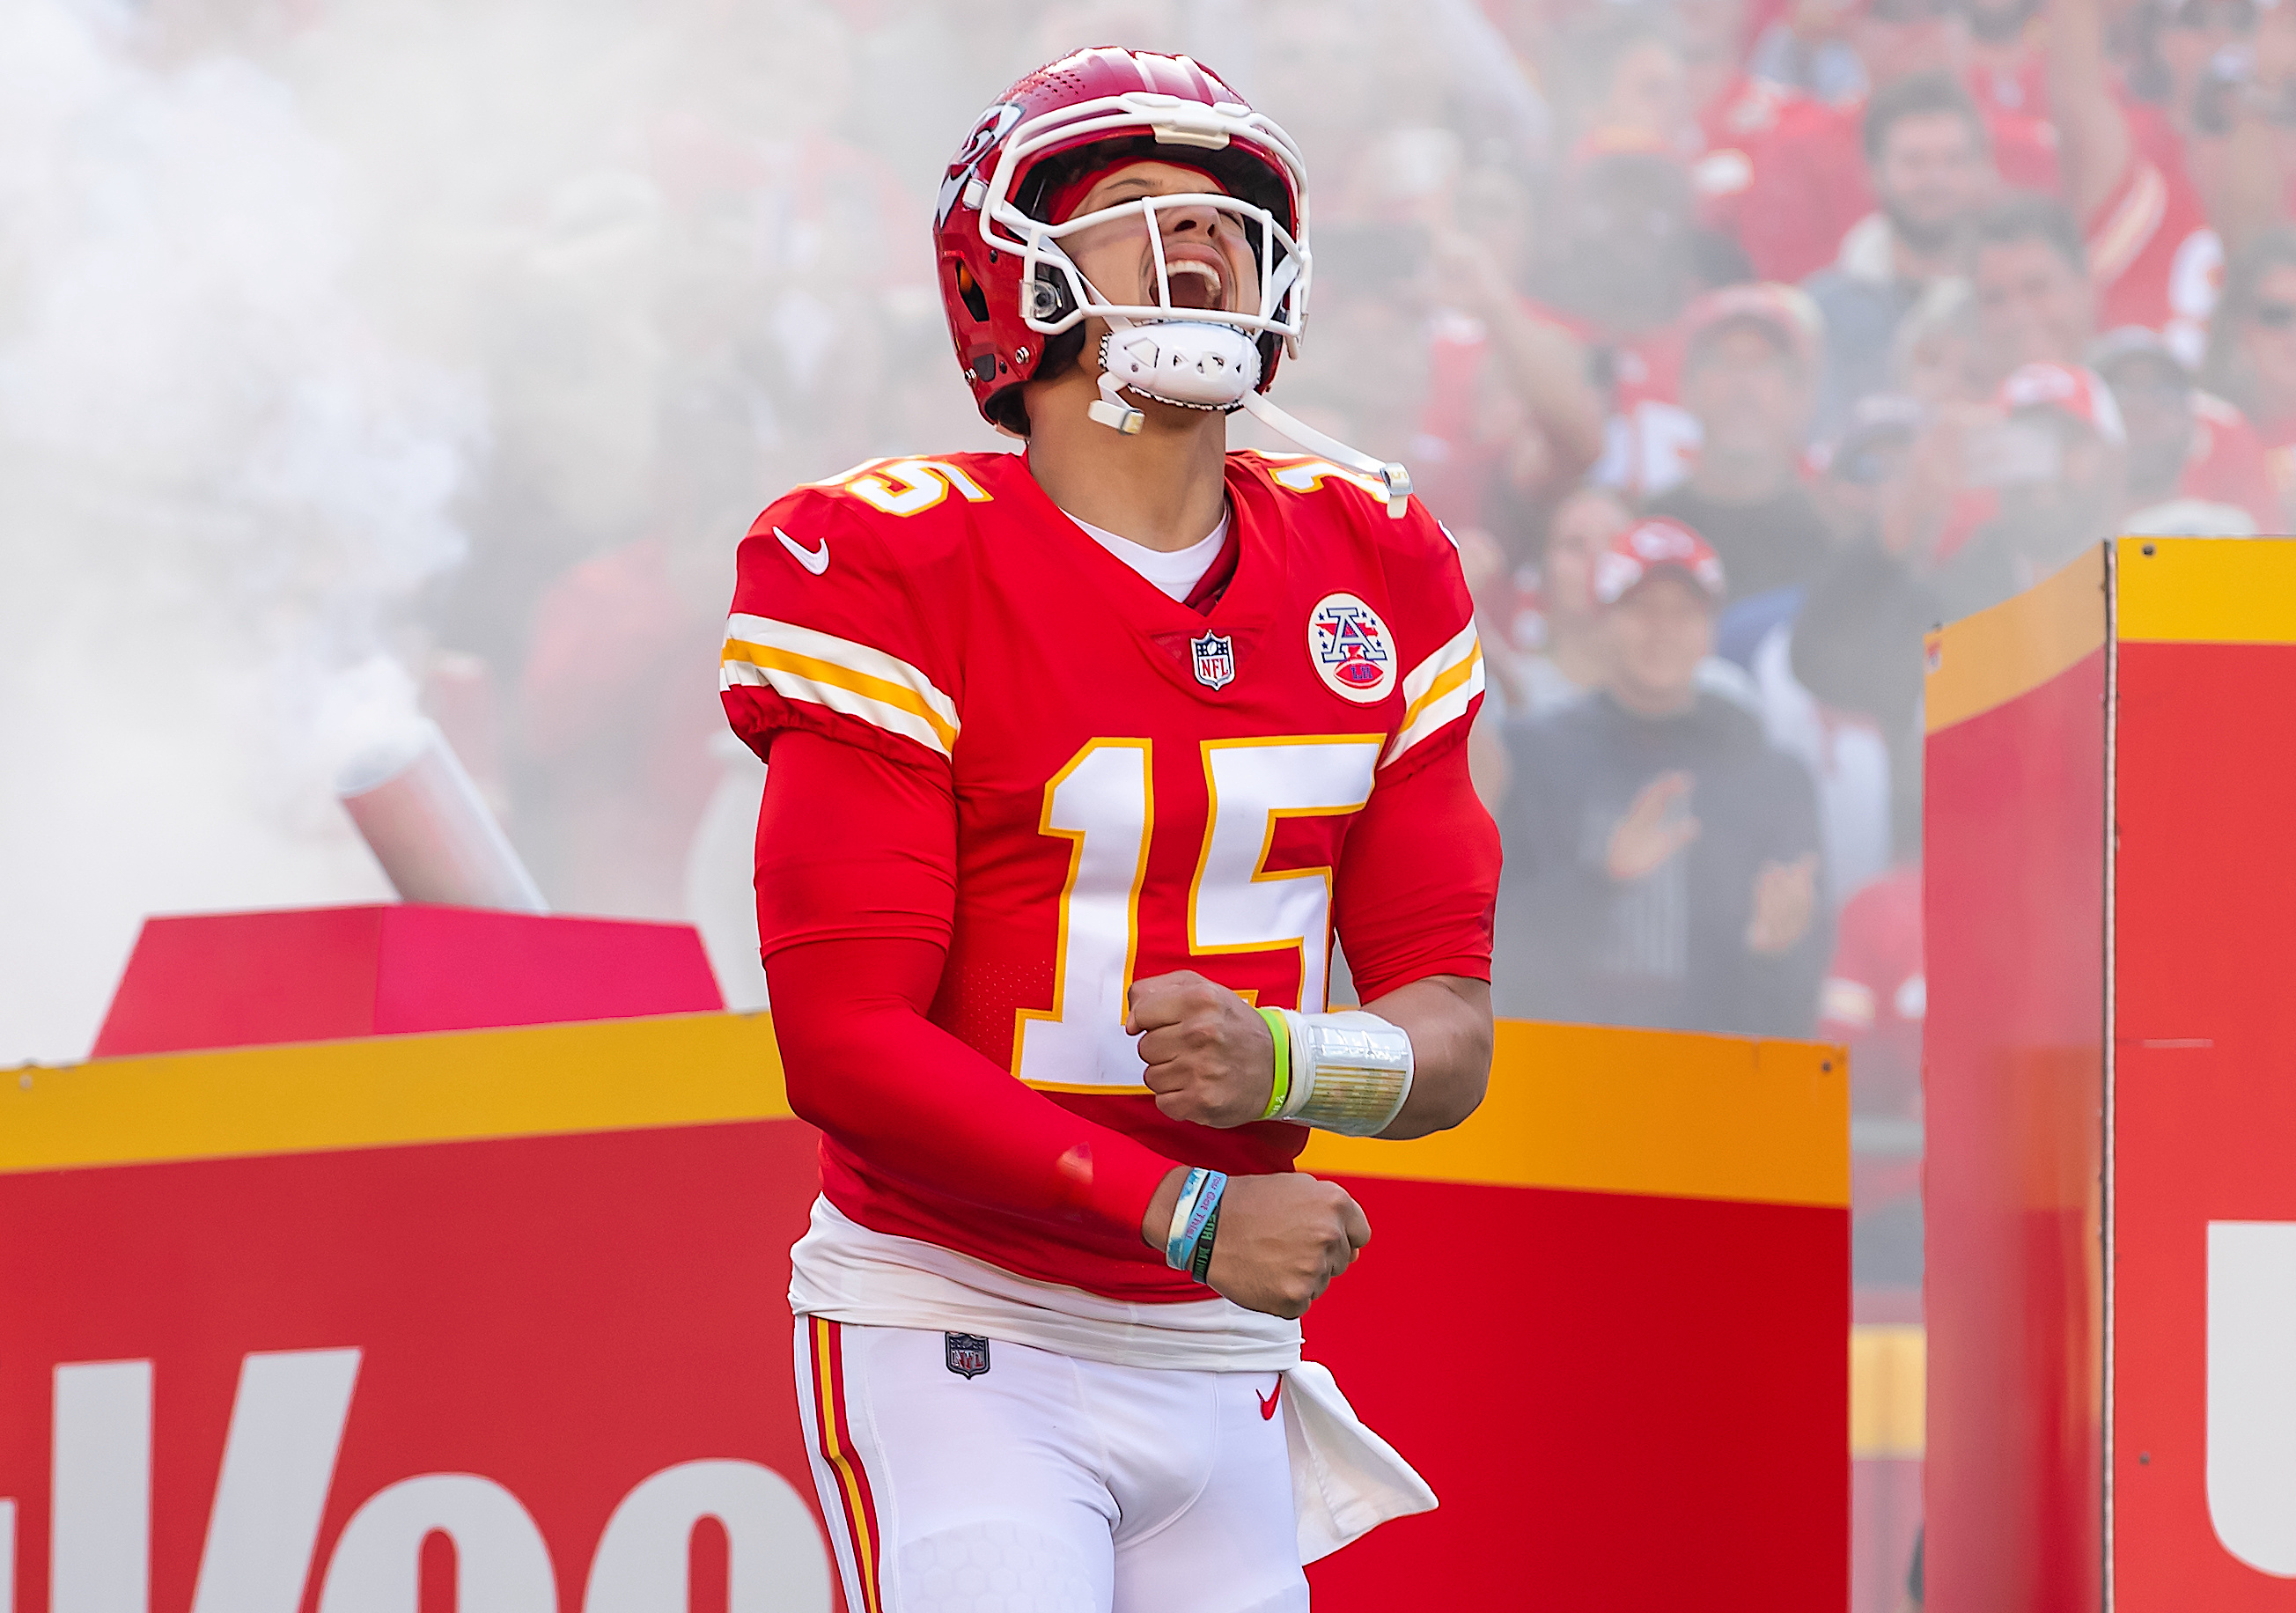 How to watch Chiefs vs. Jaguars: TV channel, time, stream